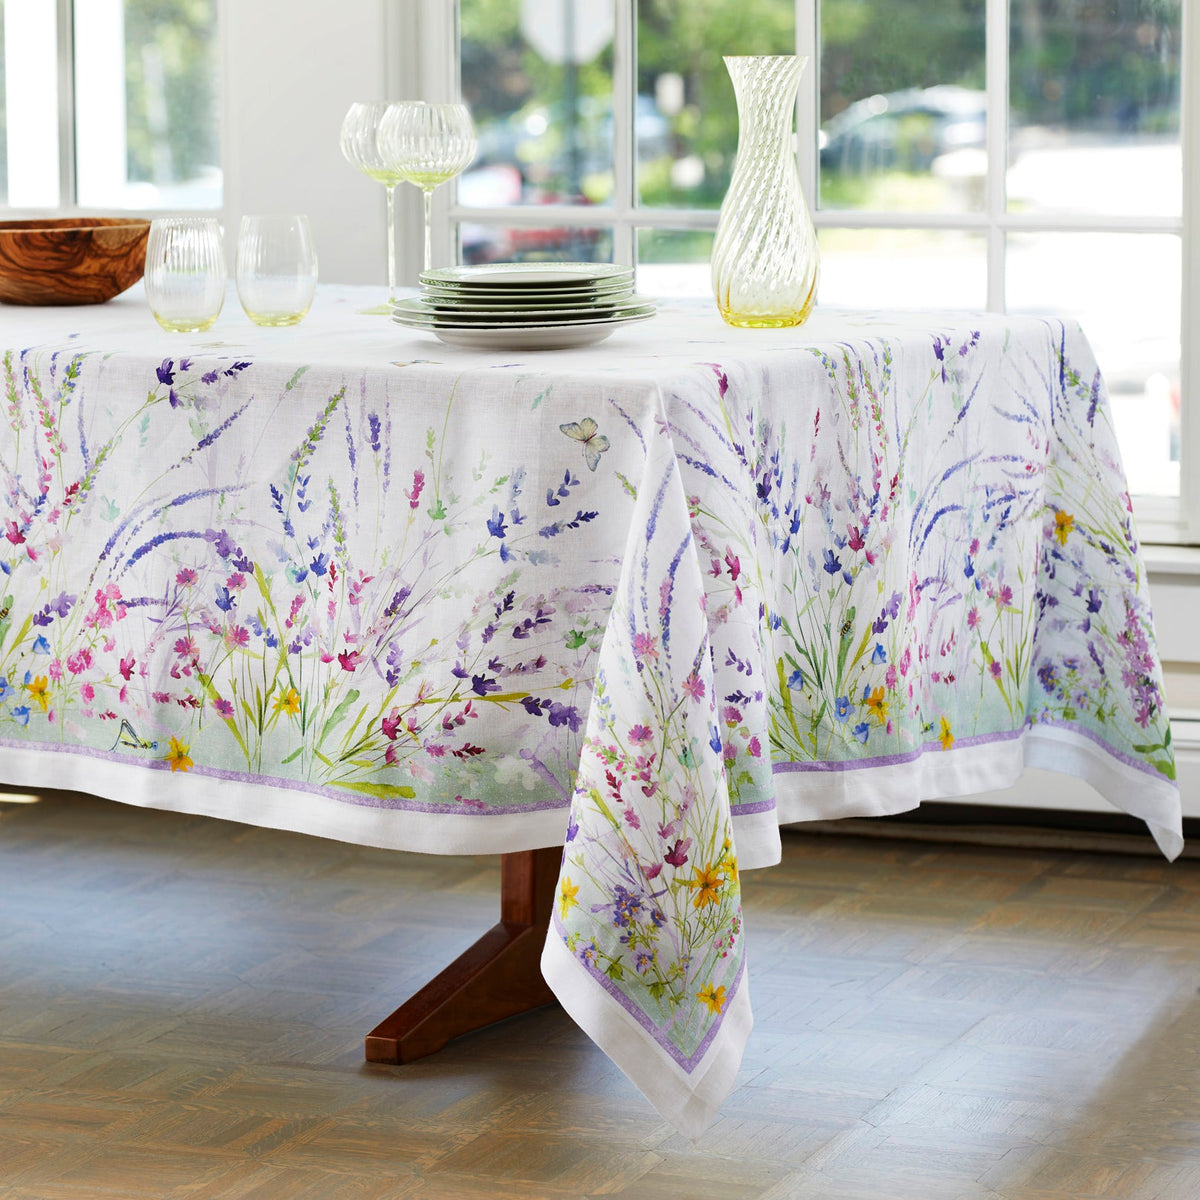 A Meadow Linen Tablecloth with flowers on it made from Italian mill by TTT.